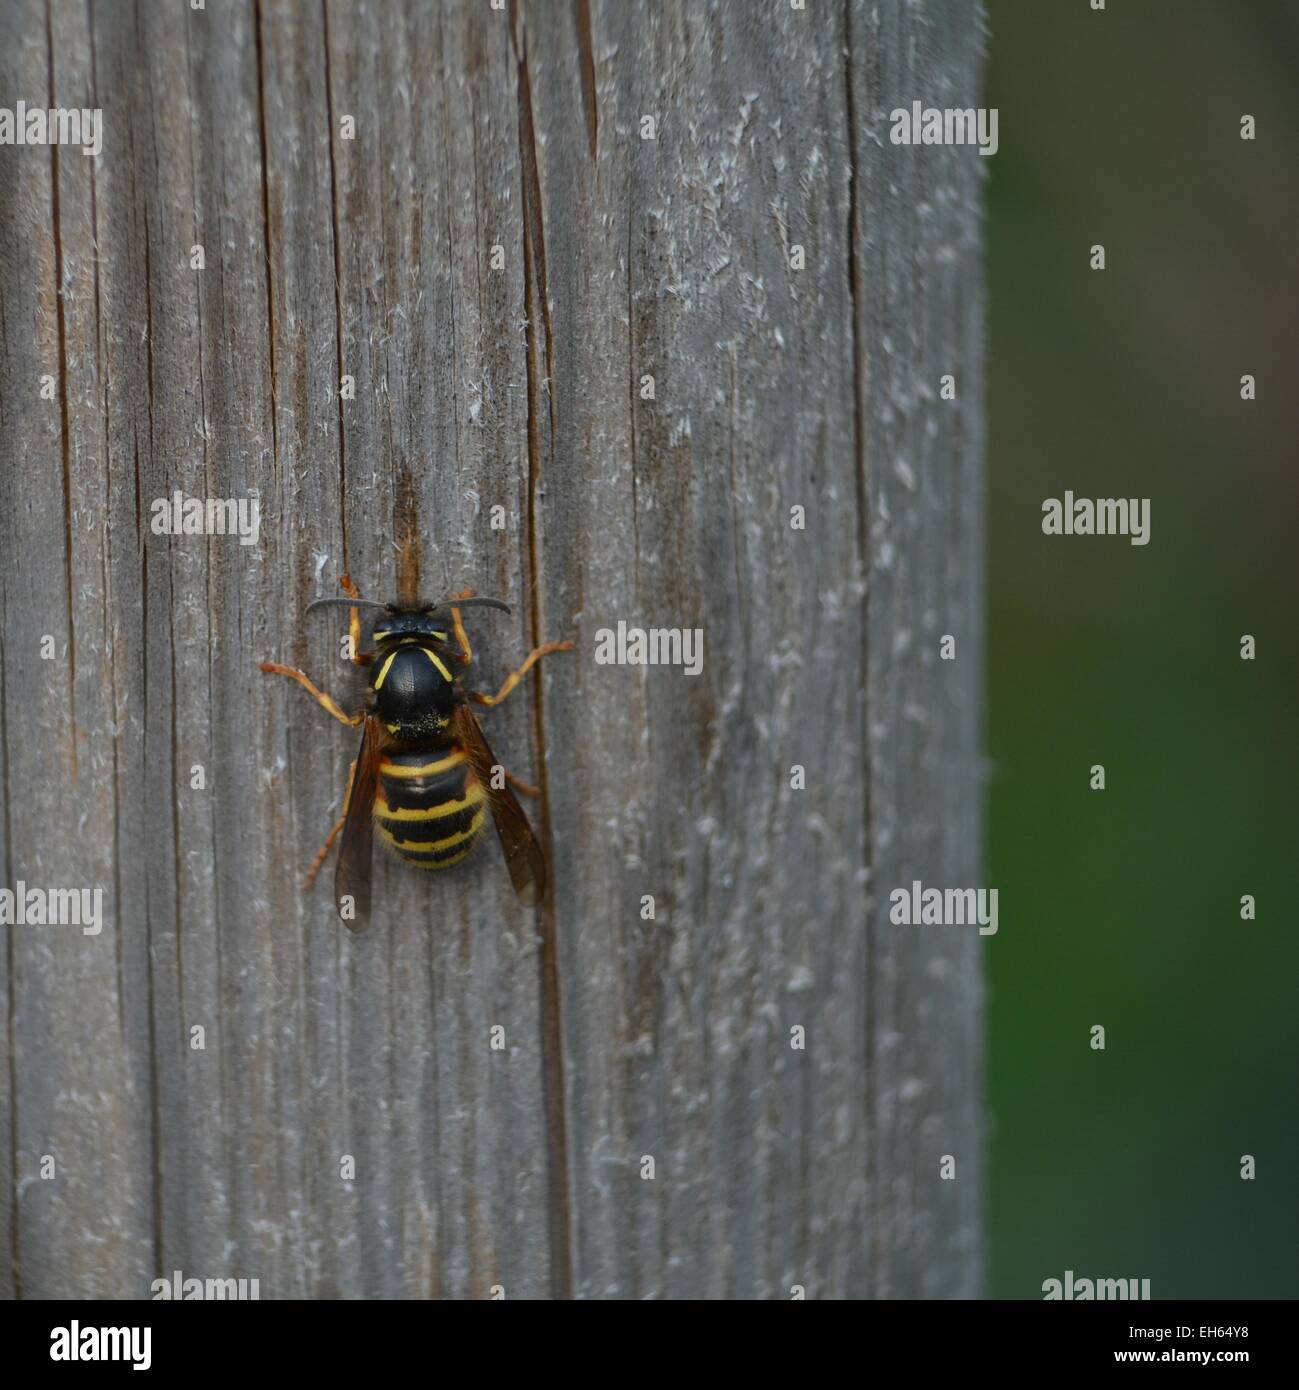 wasp sitting on a piece of wood Stock Photo